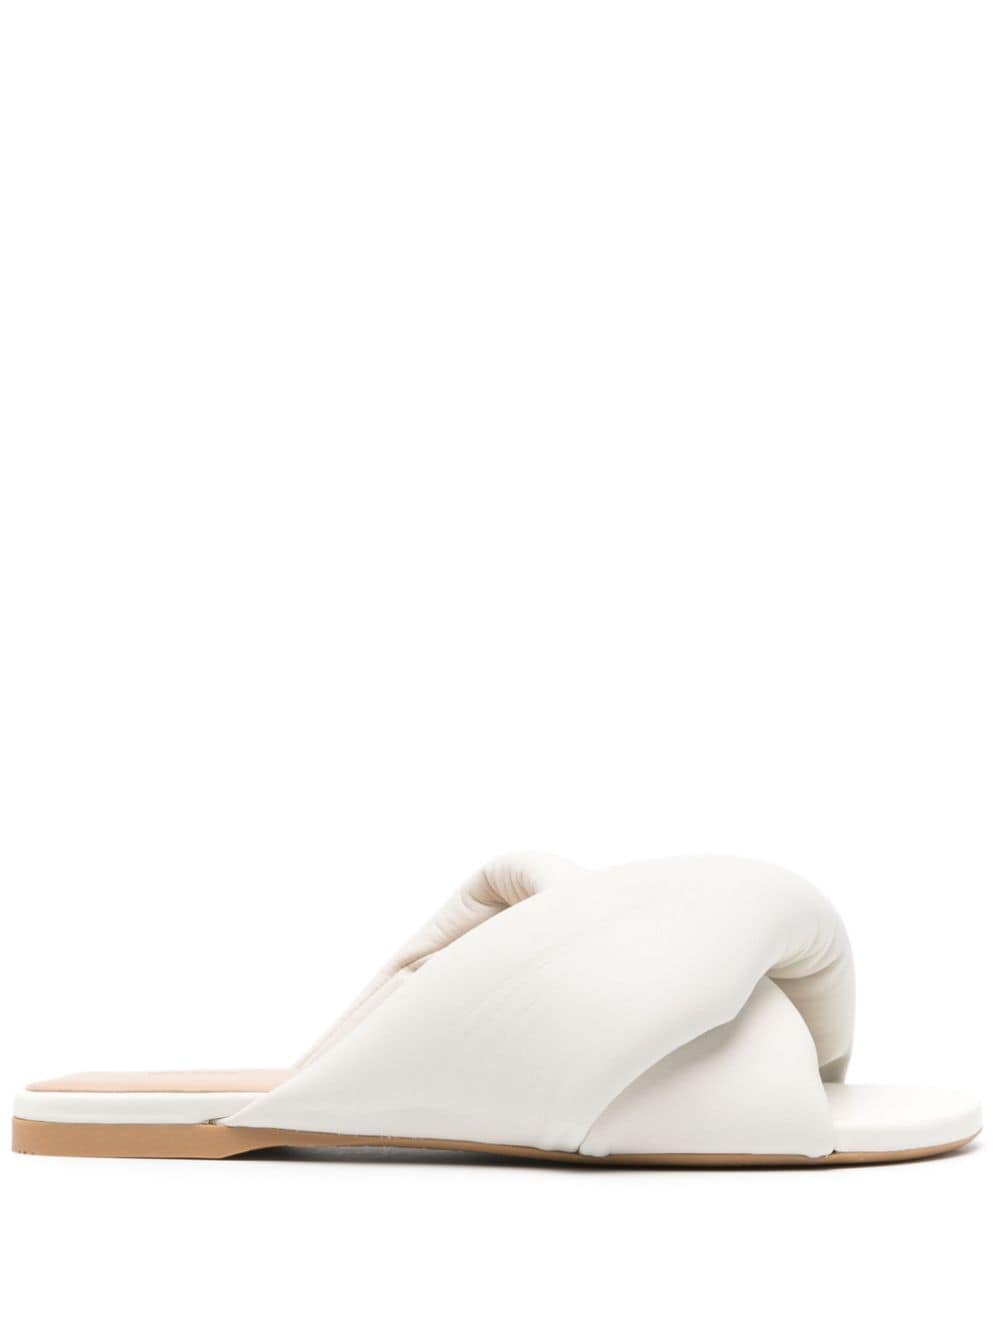 JW Anderson leather flat sandals - White